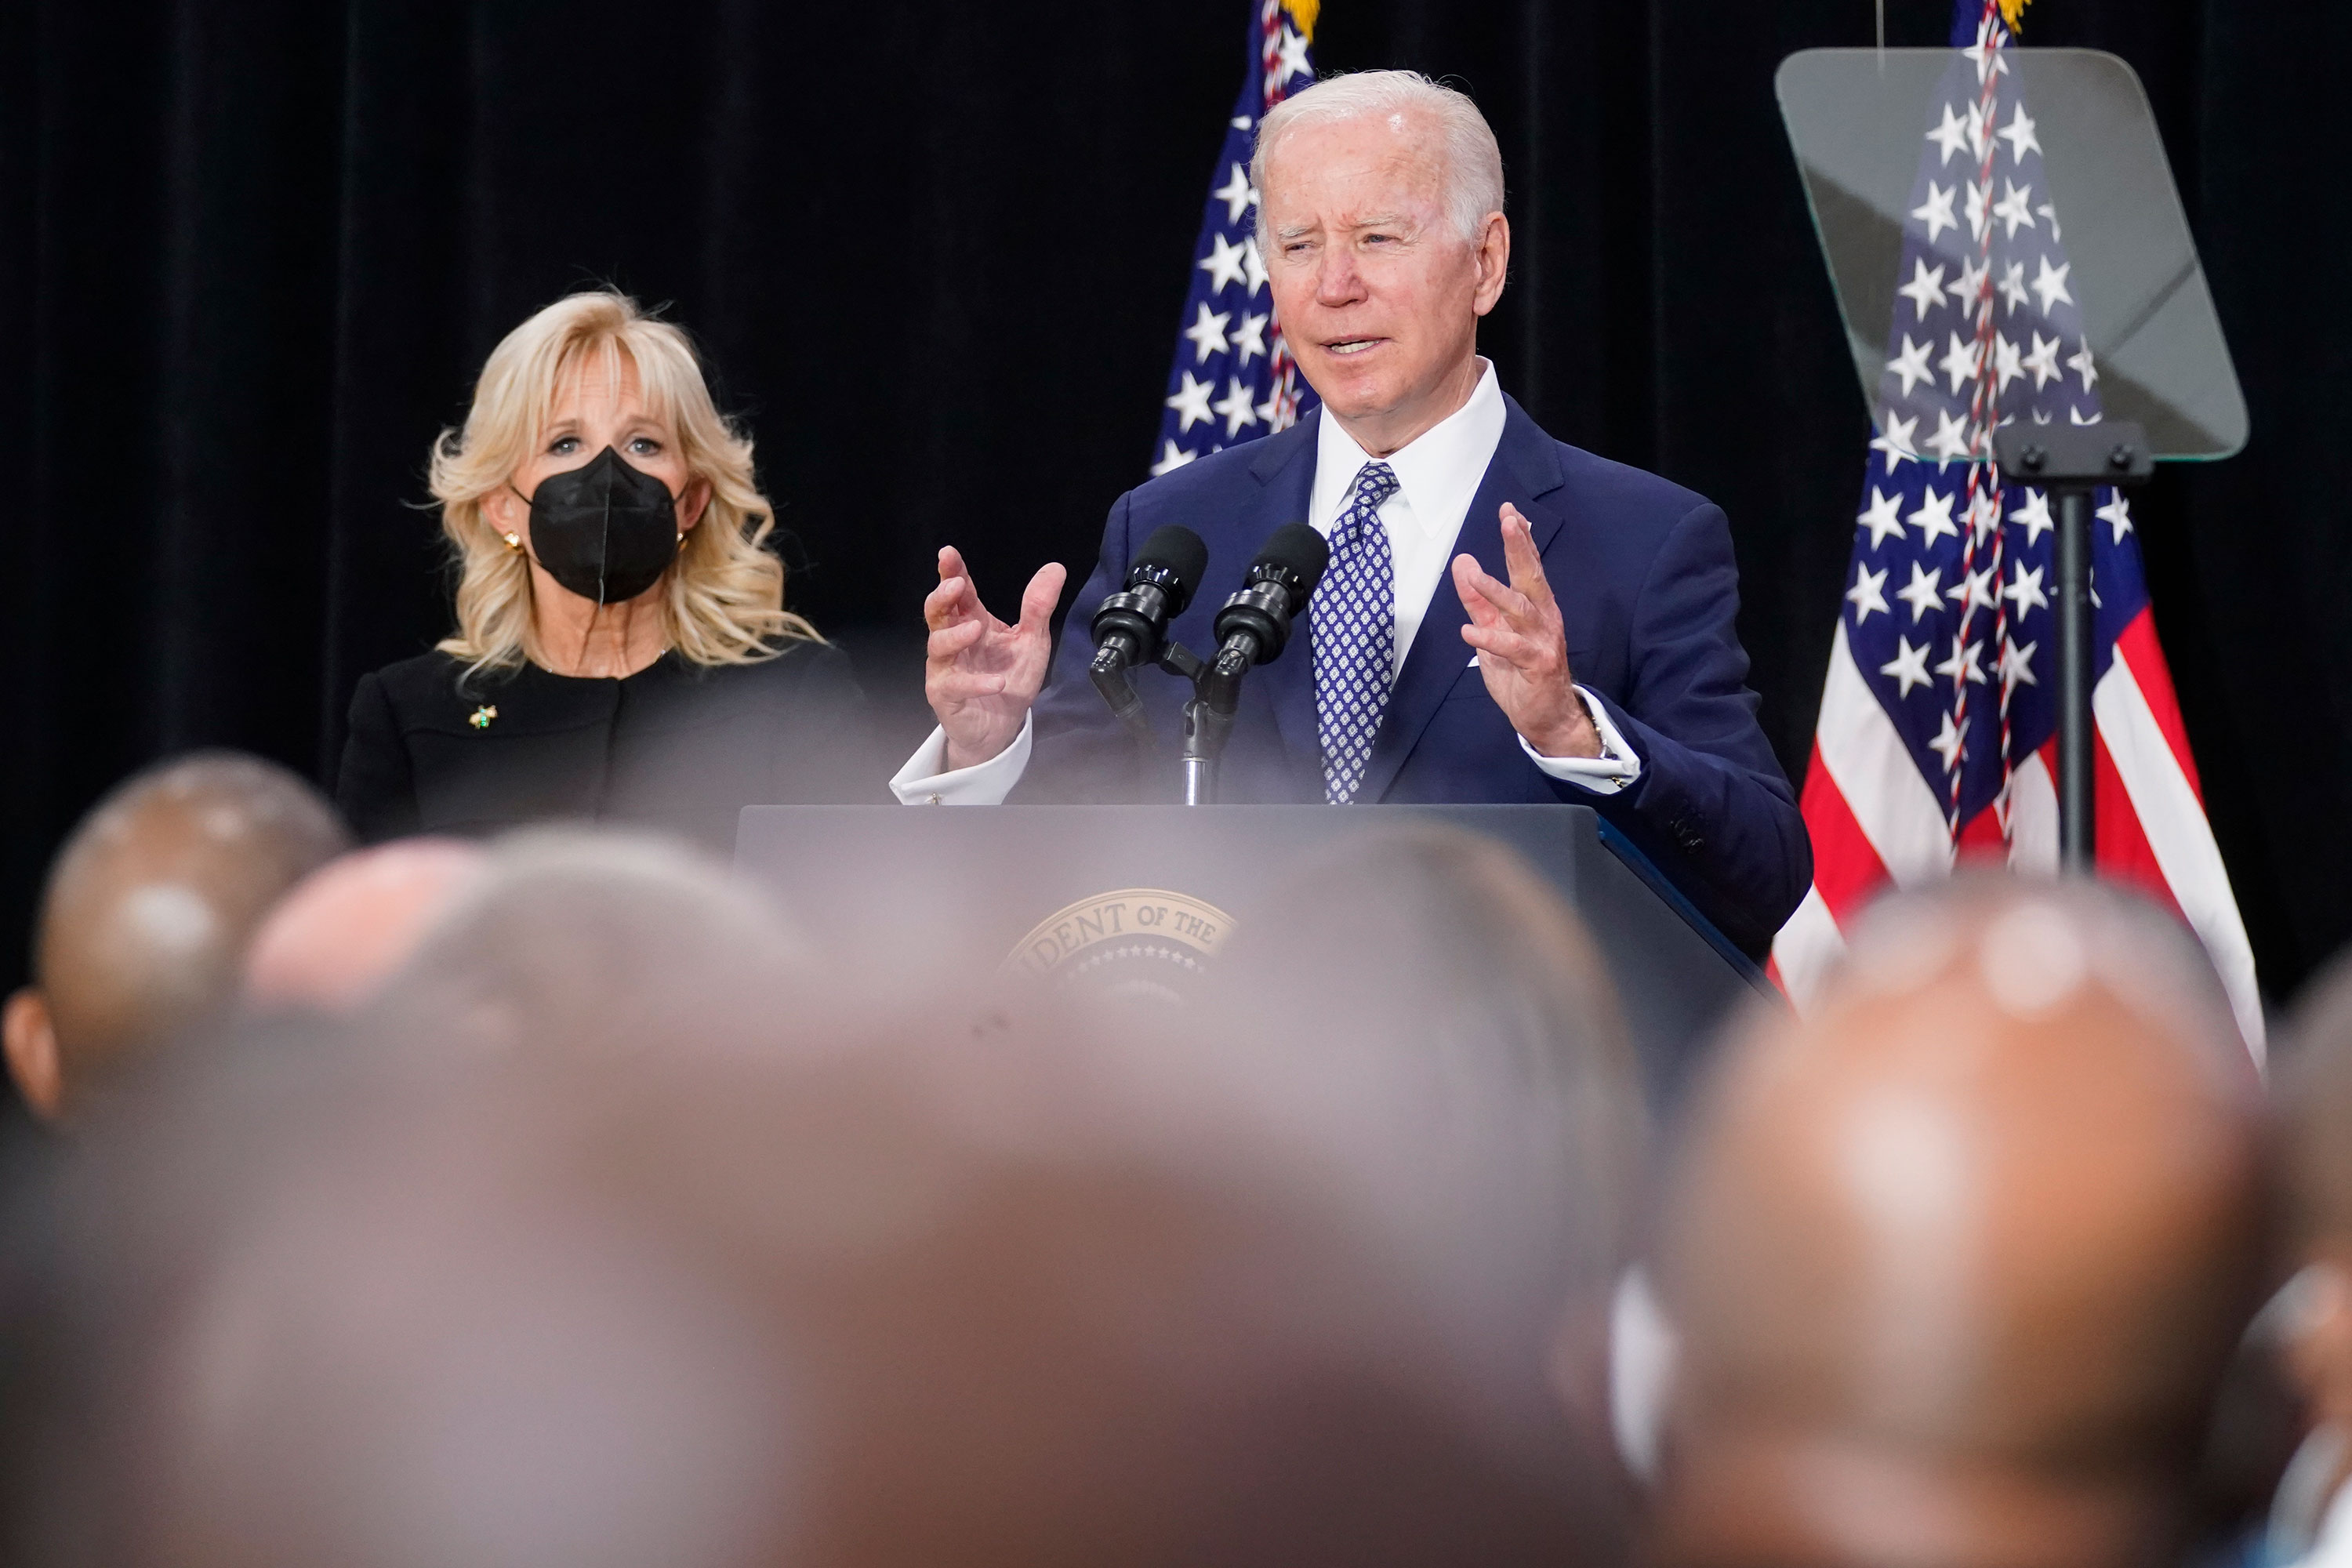 Biden says Buffalo mass shooting is “terrorism” and calls White supremacy a “poison”